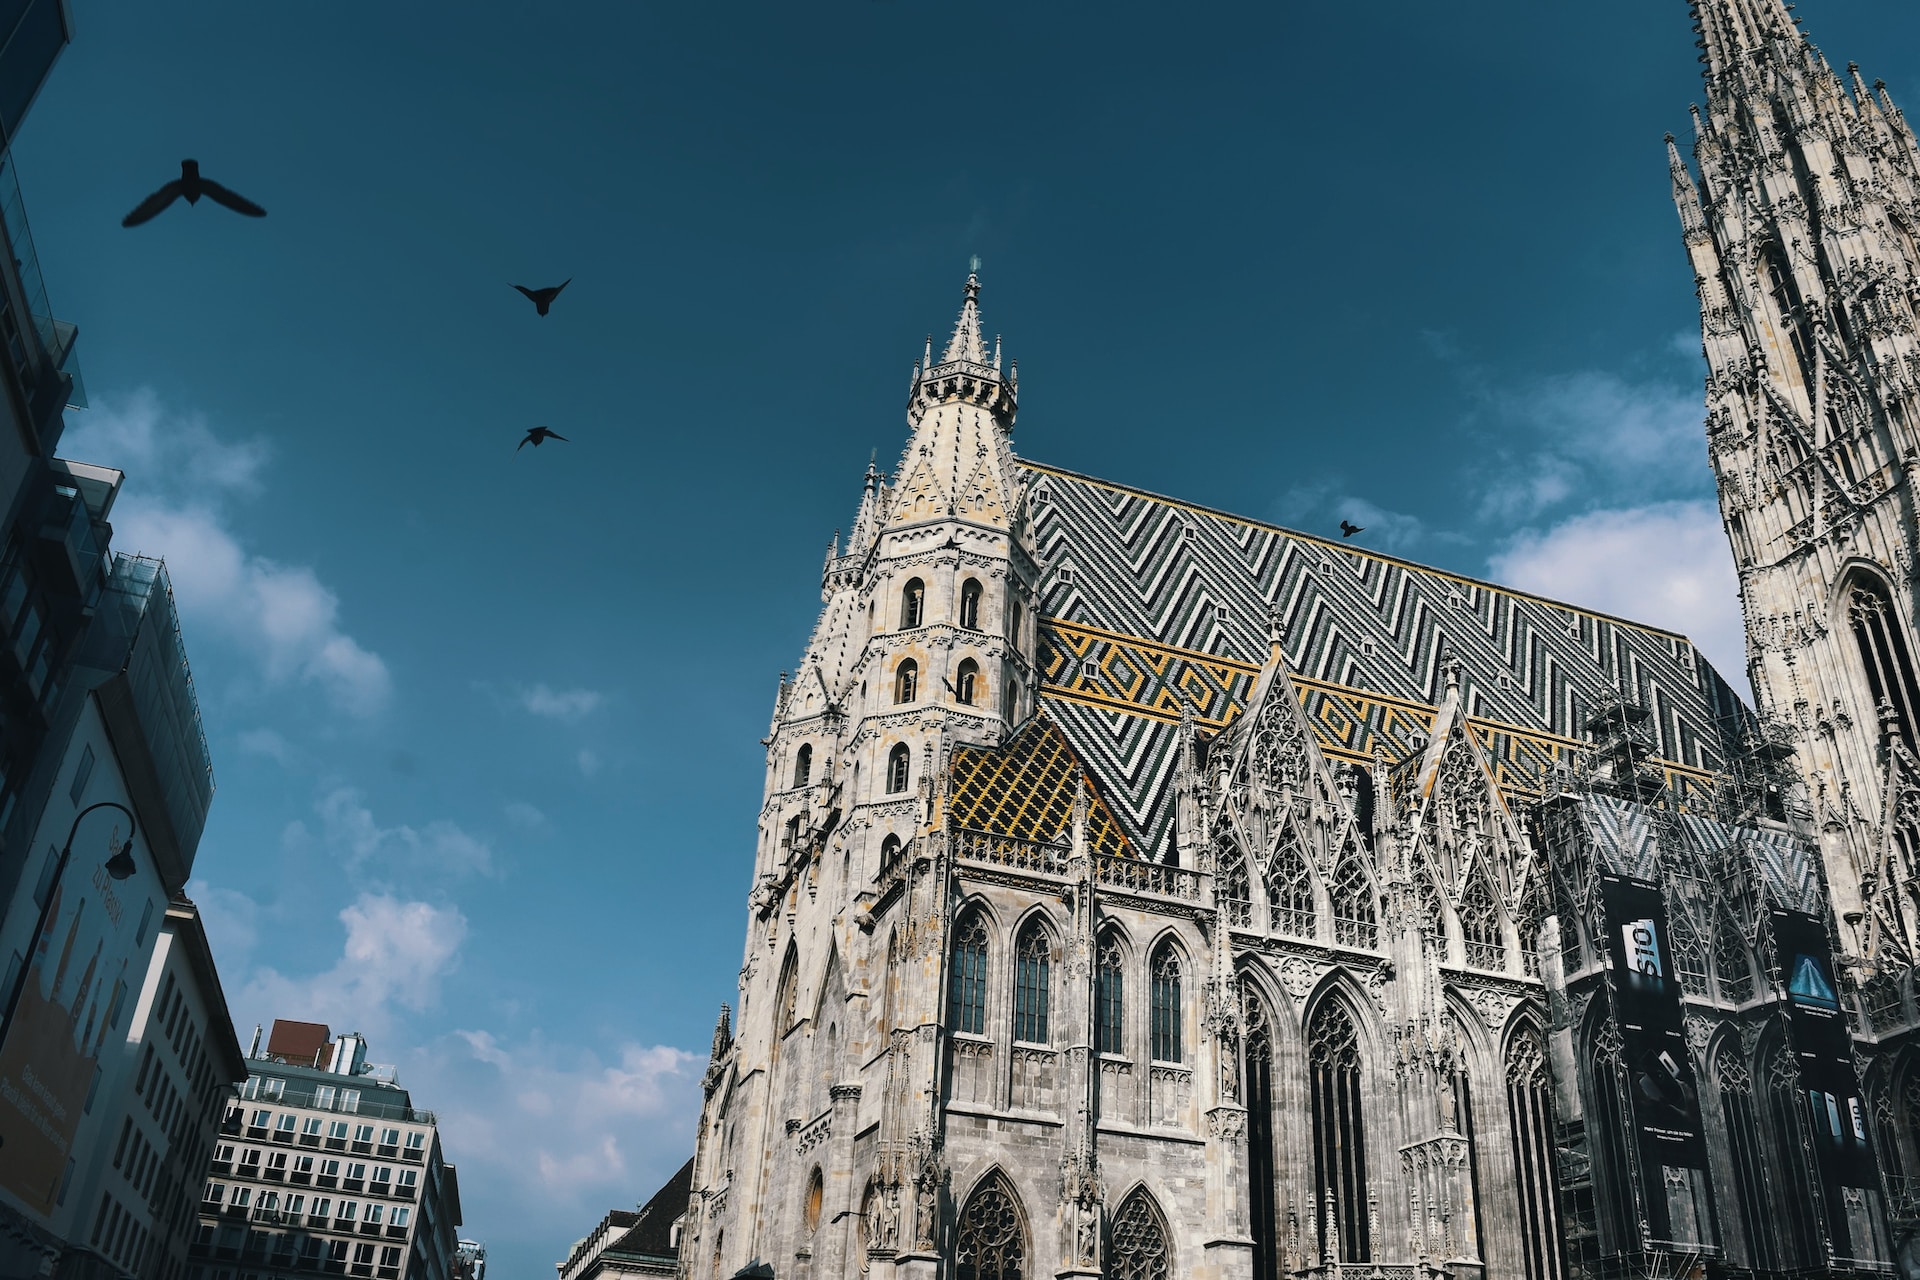 Vienna’s St. Stephen’s Cathedral: A Gothic Triumph